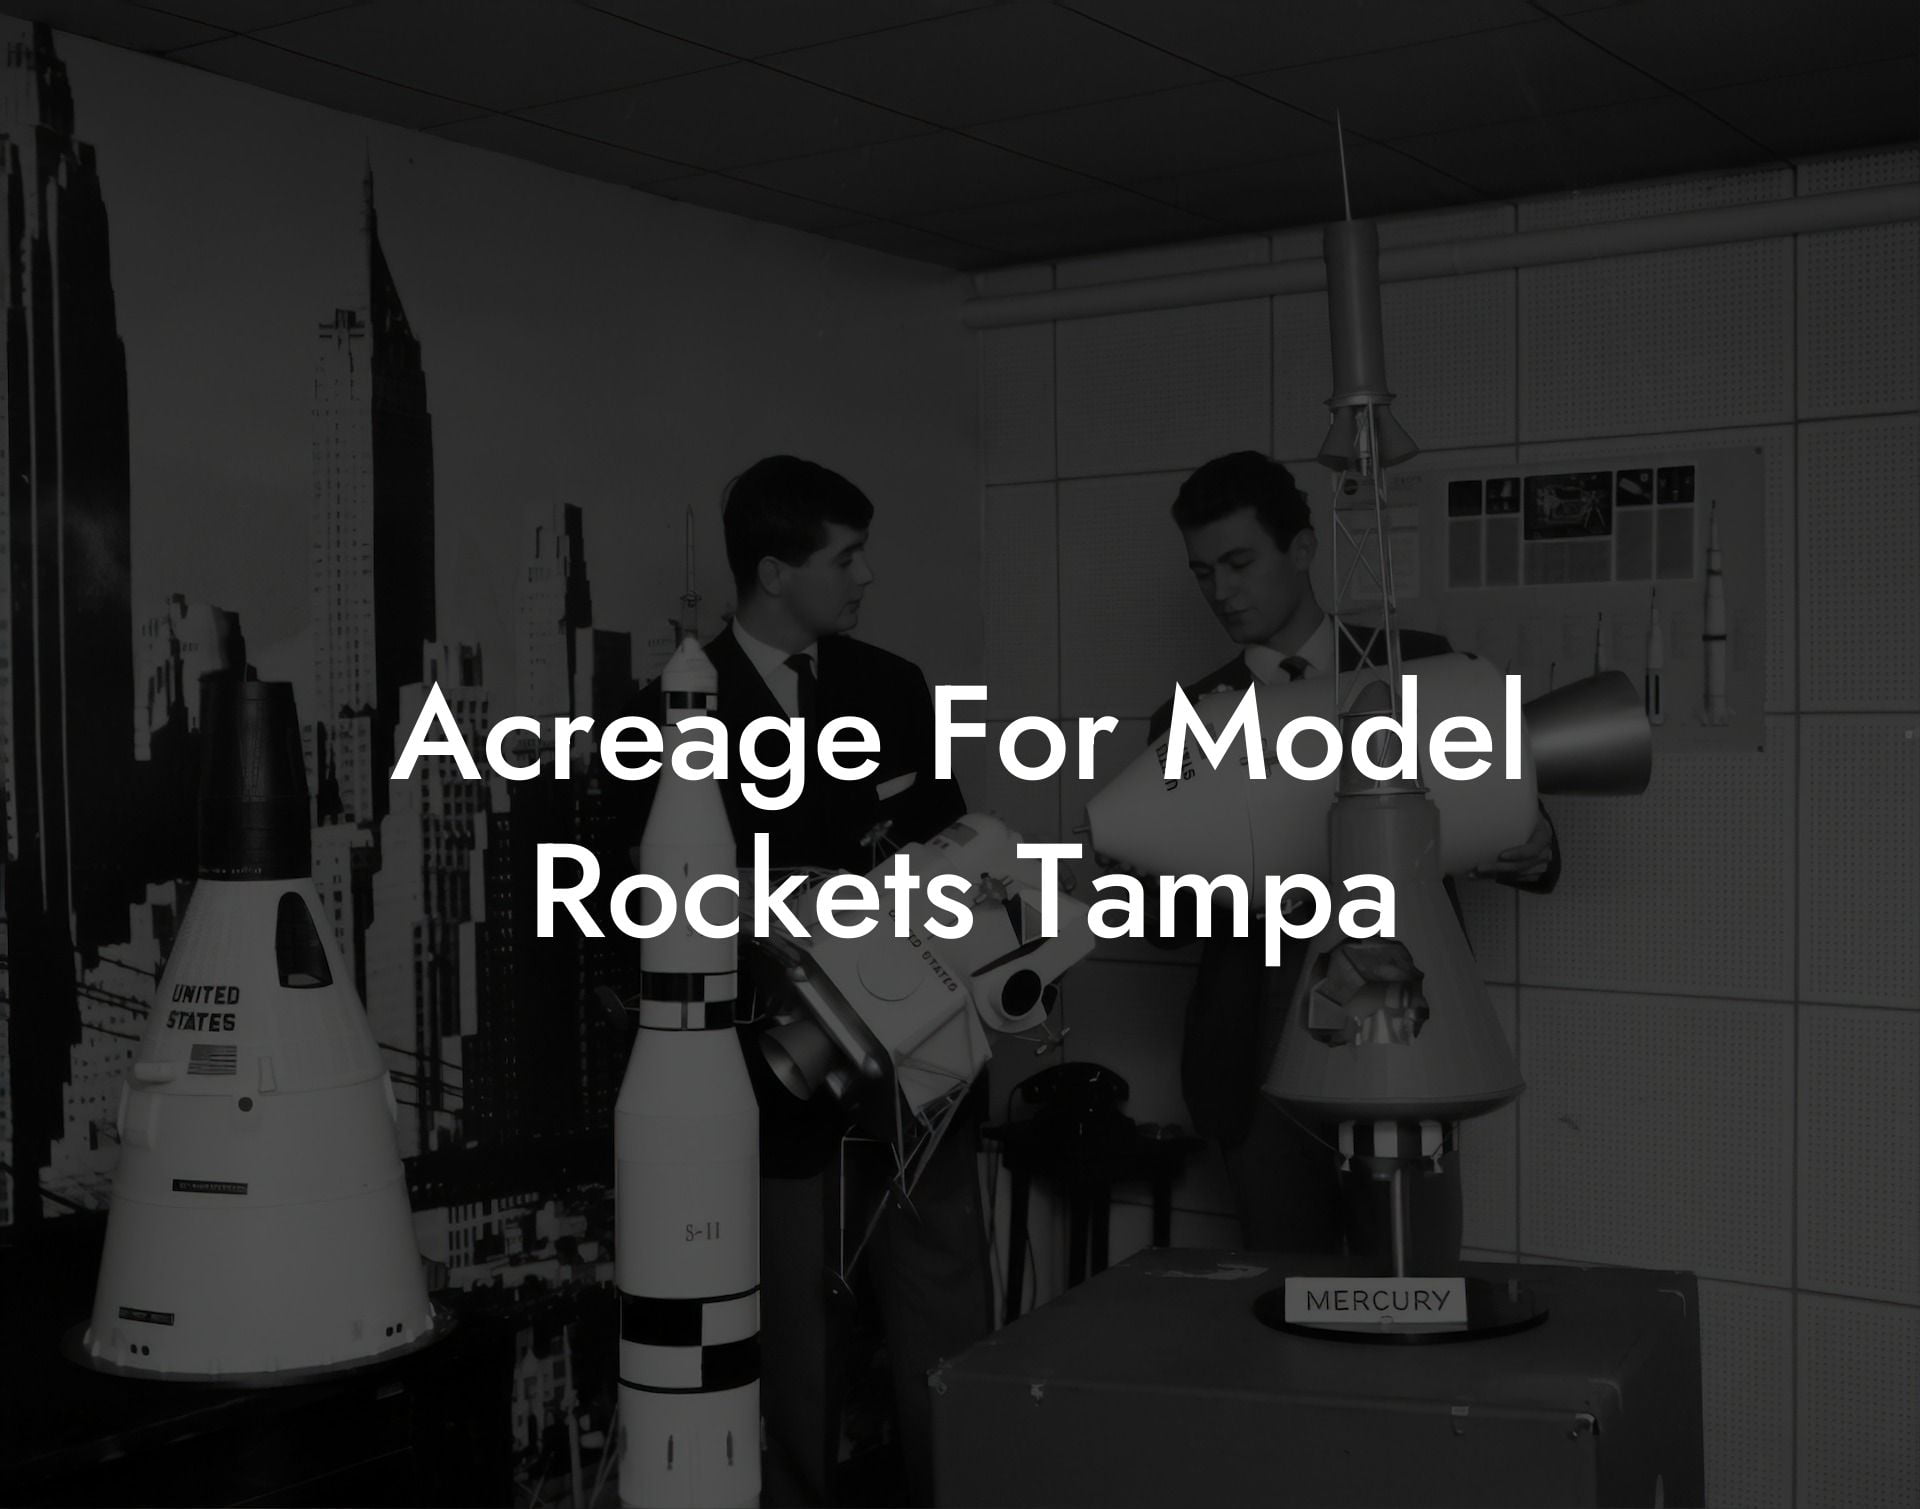 Acreage For Model Rockets Tampa